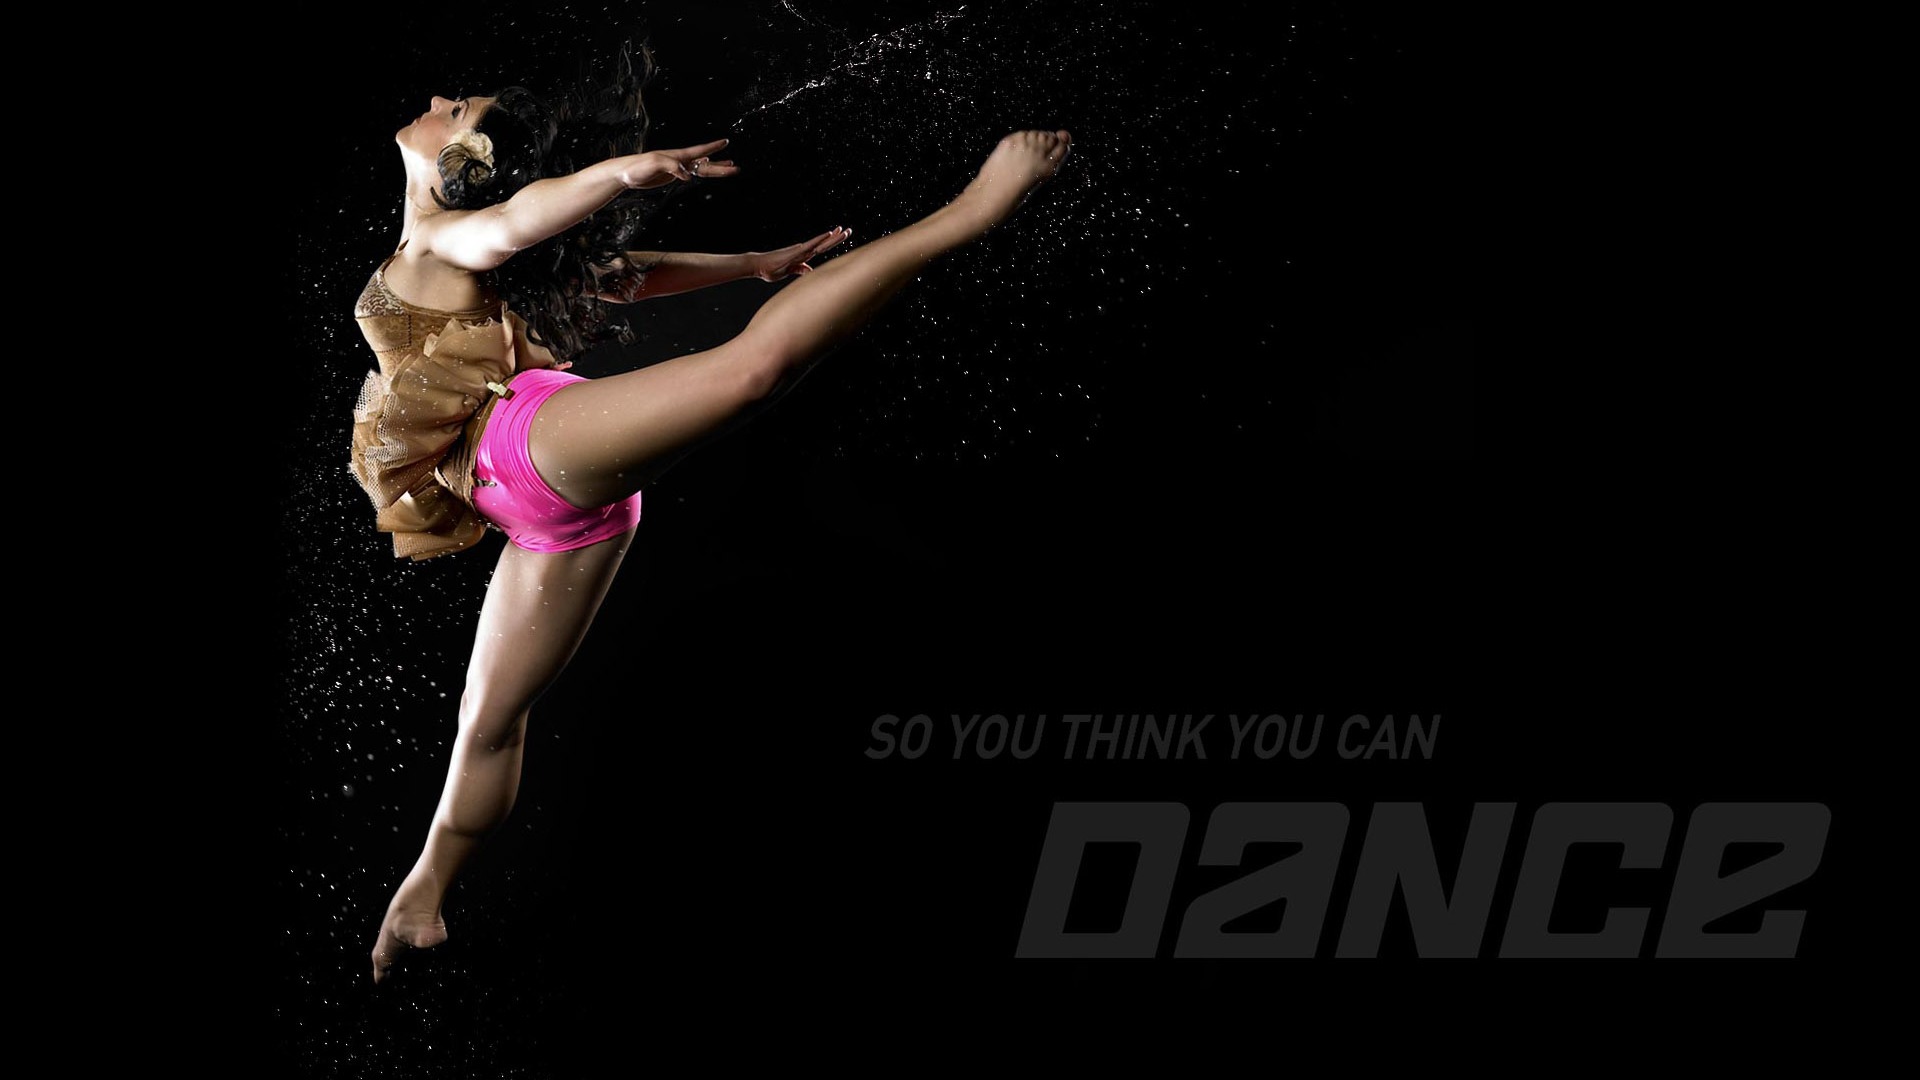 So You Think You Can Dance wallpaper (1) #17 - 1920x1080